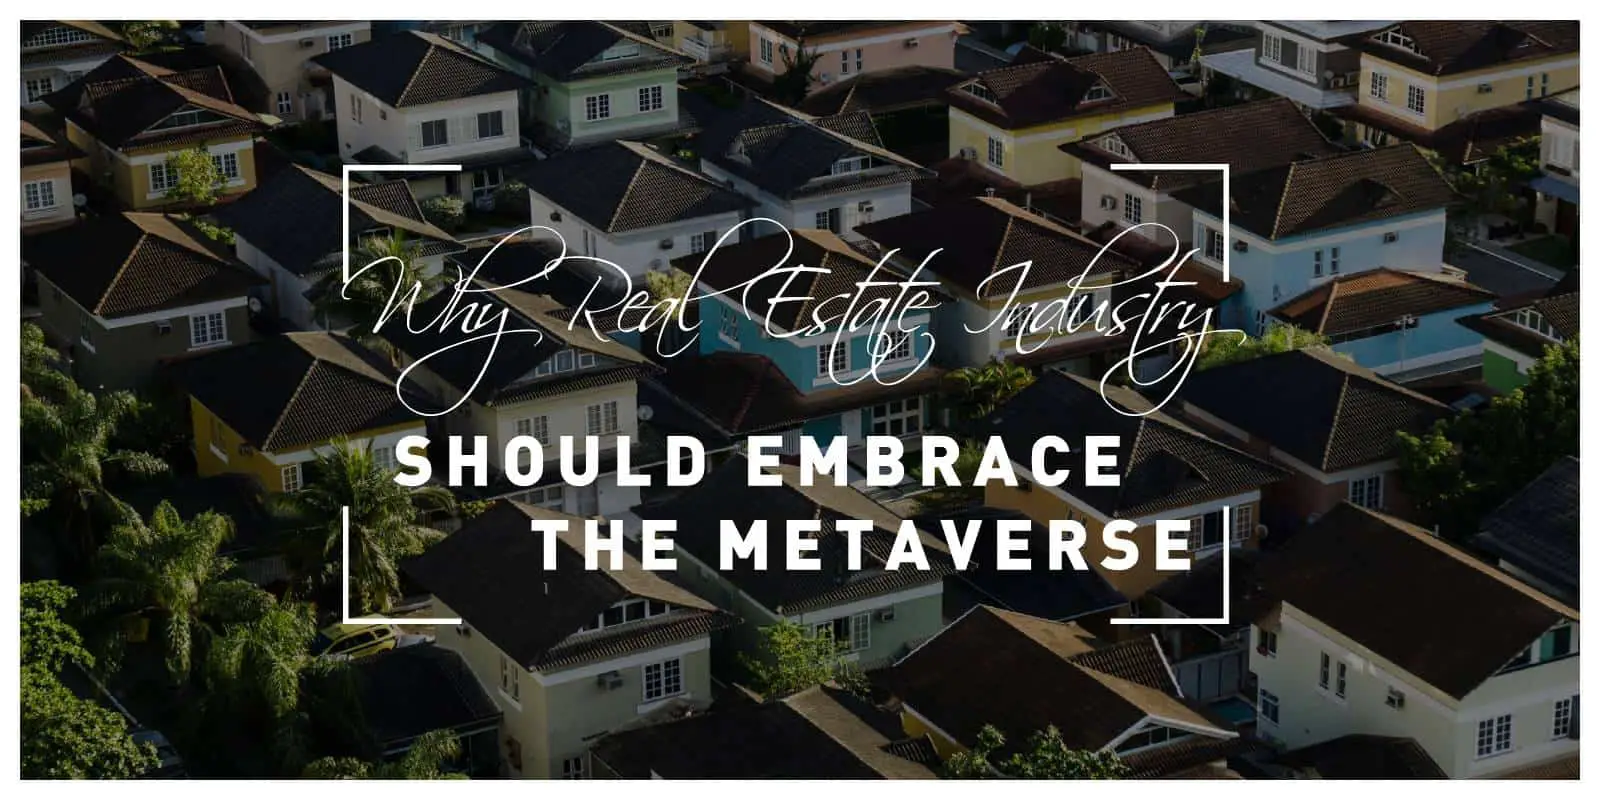 Here Is Why the Real Estate Industry Should Embrace the Metaverse